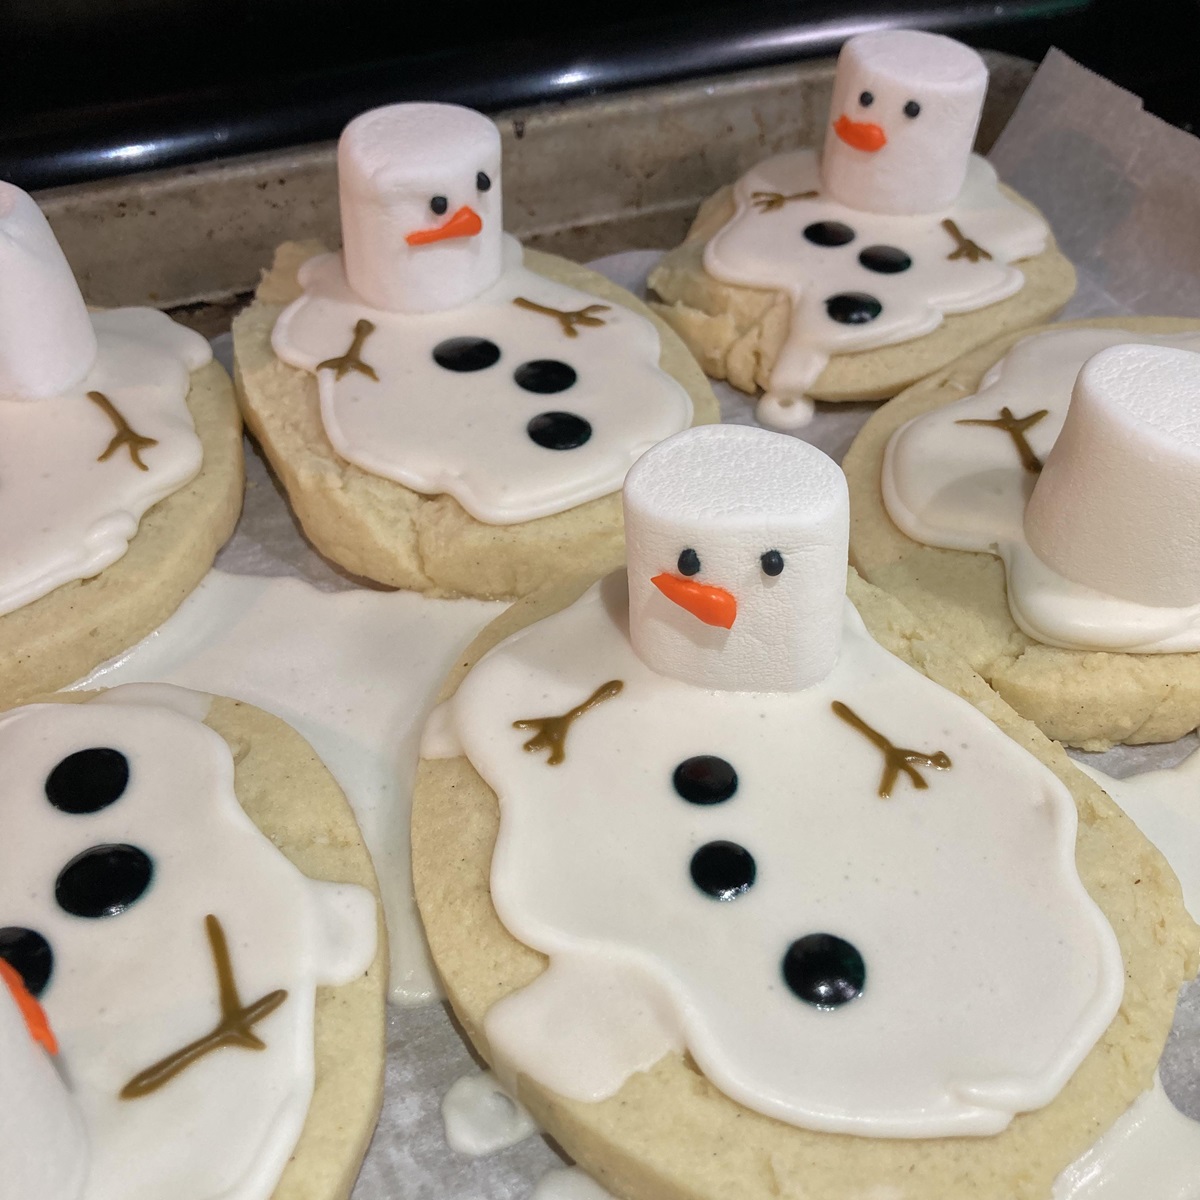 First Attempt Ever At Royal Icing And Flooding. Not Perfect, So I Think The Melted Snowman Cookies Were The Right Choice For A First Project. They're Authentic Looking